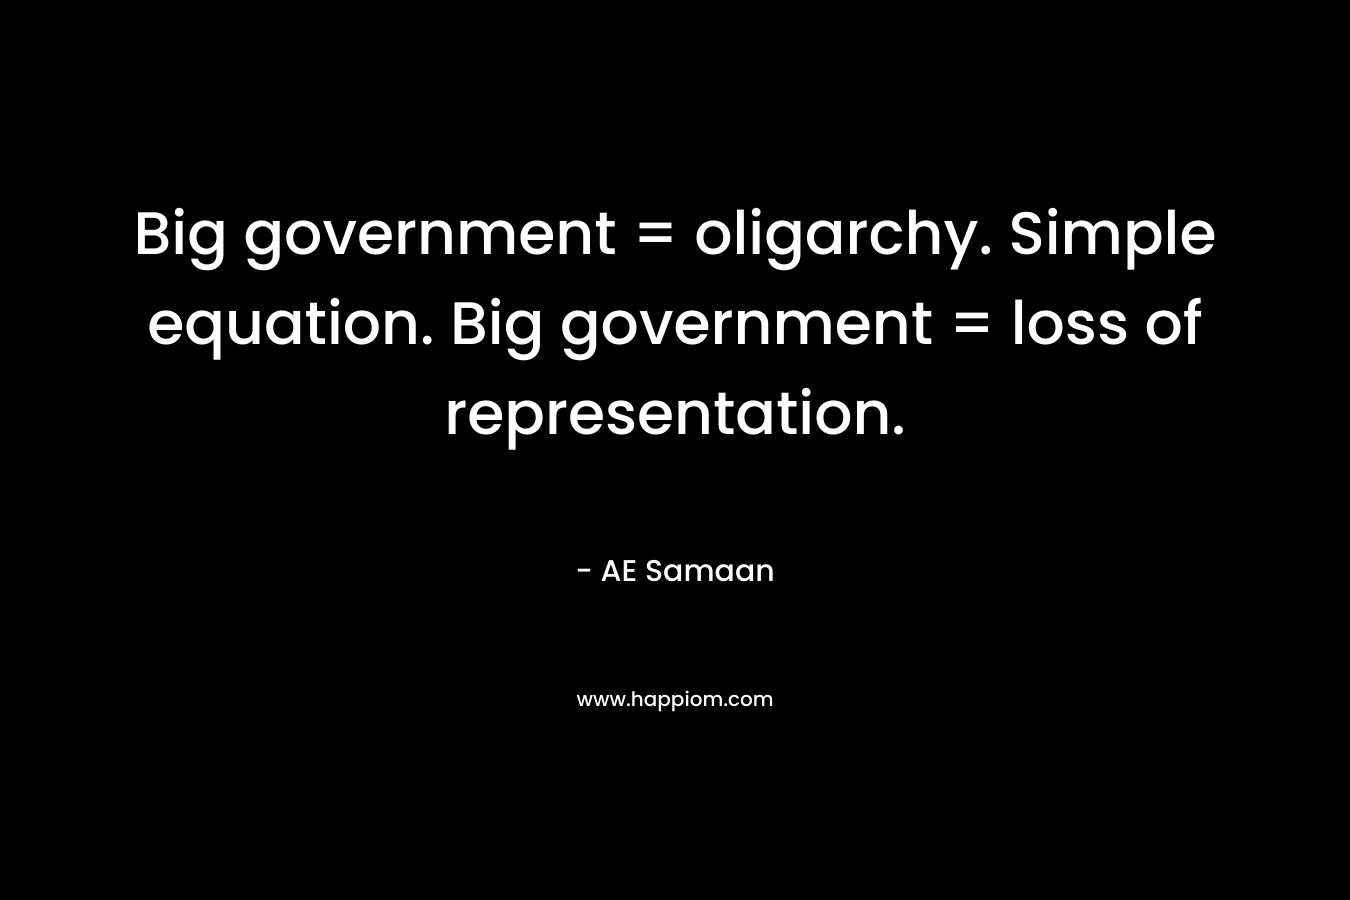 Big government = oligarchy. Simple equation. Big government = loss of representation. – AE Samaan